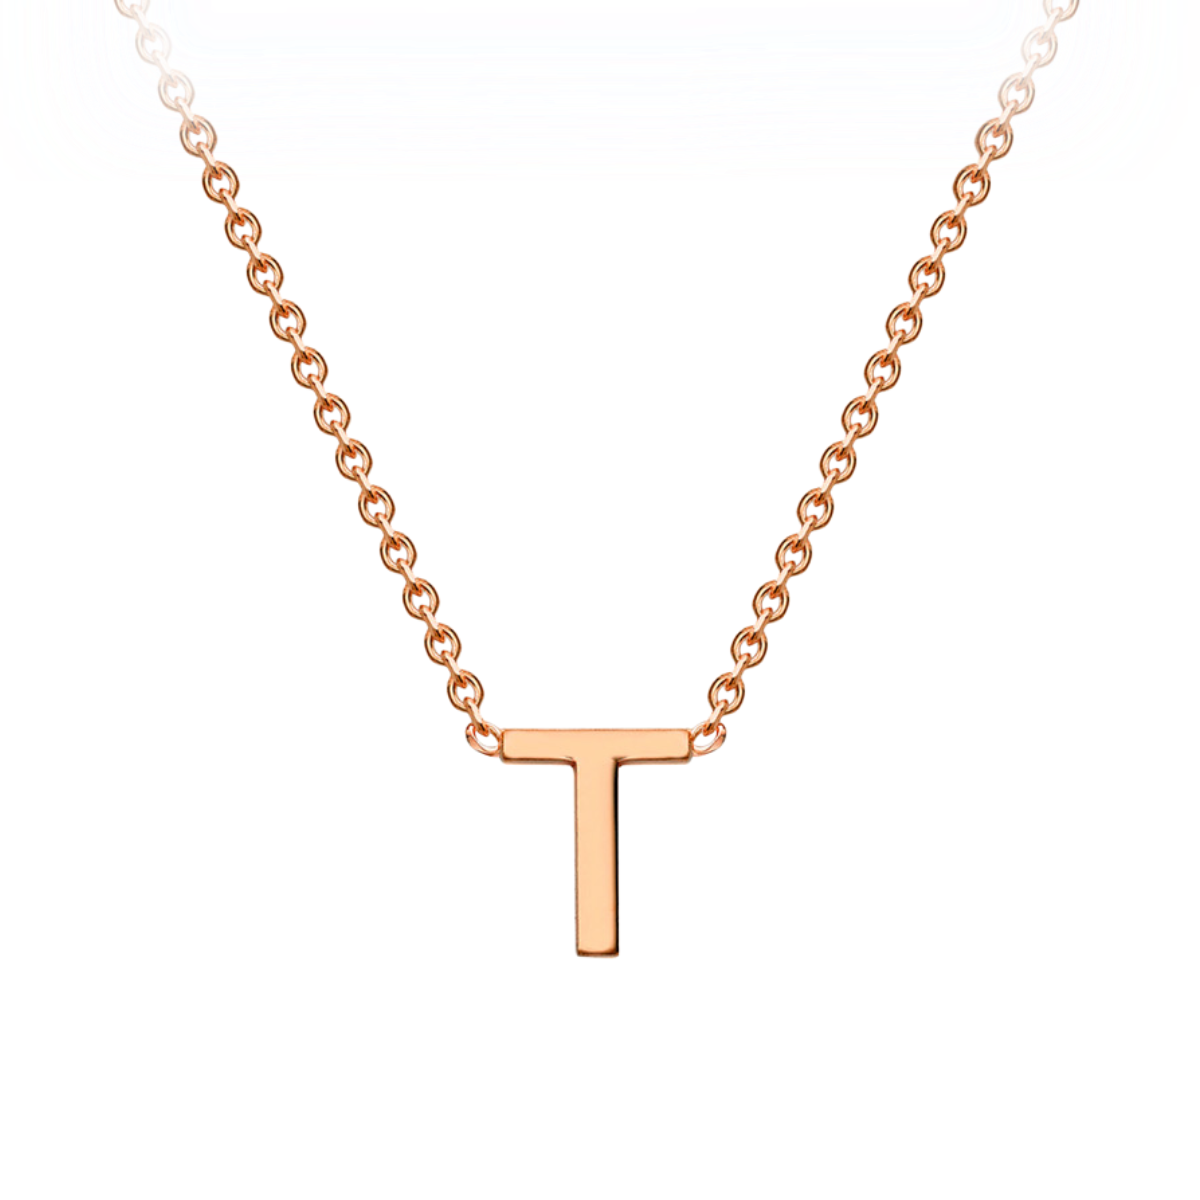 PETITE 'T' INITIAL NECKLACE | 9K SOLID ROSE GOLD